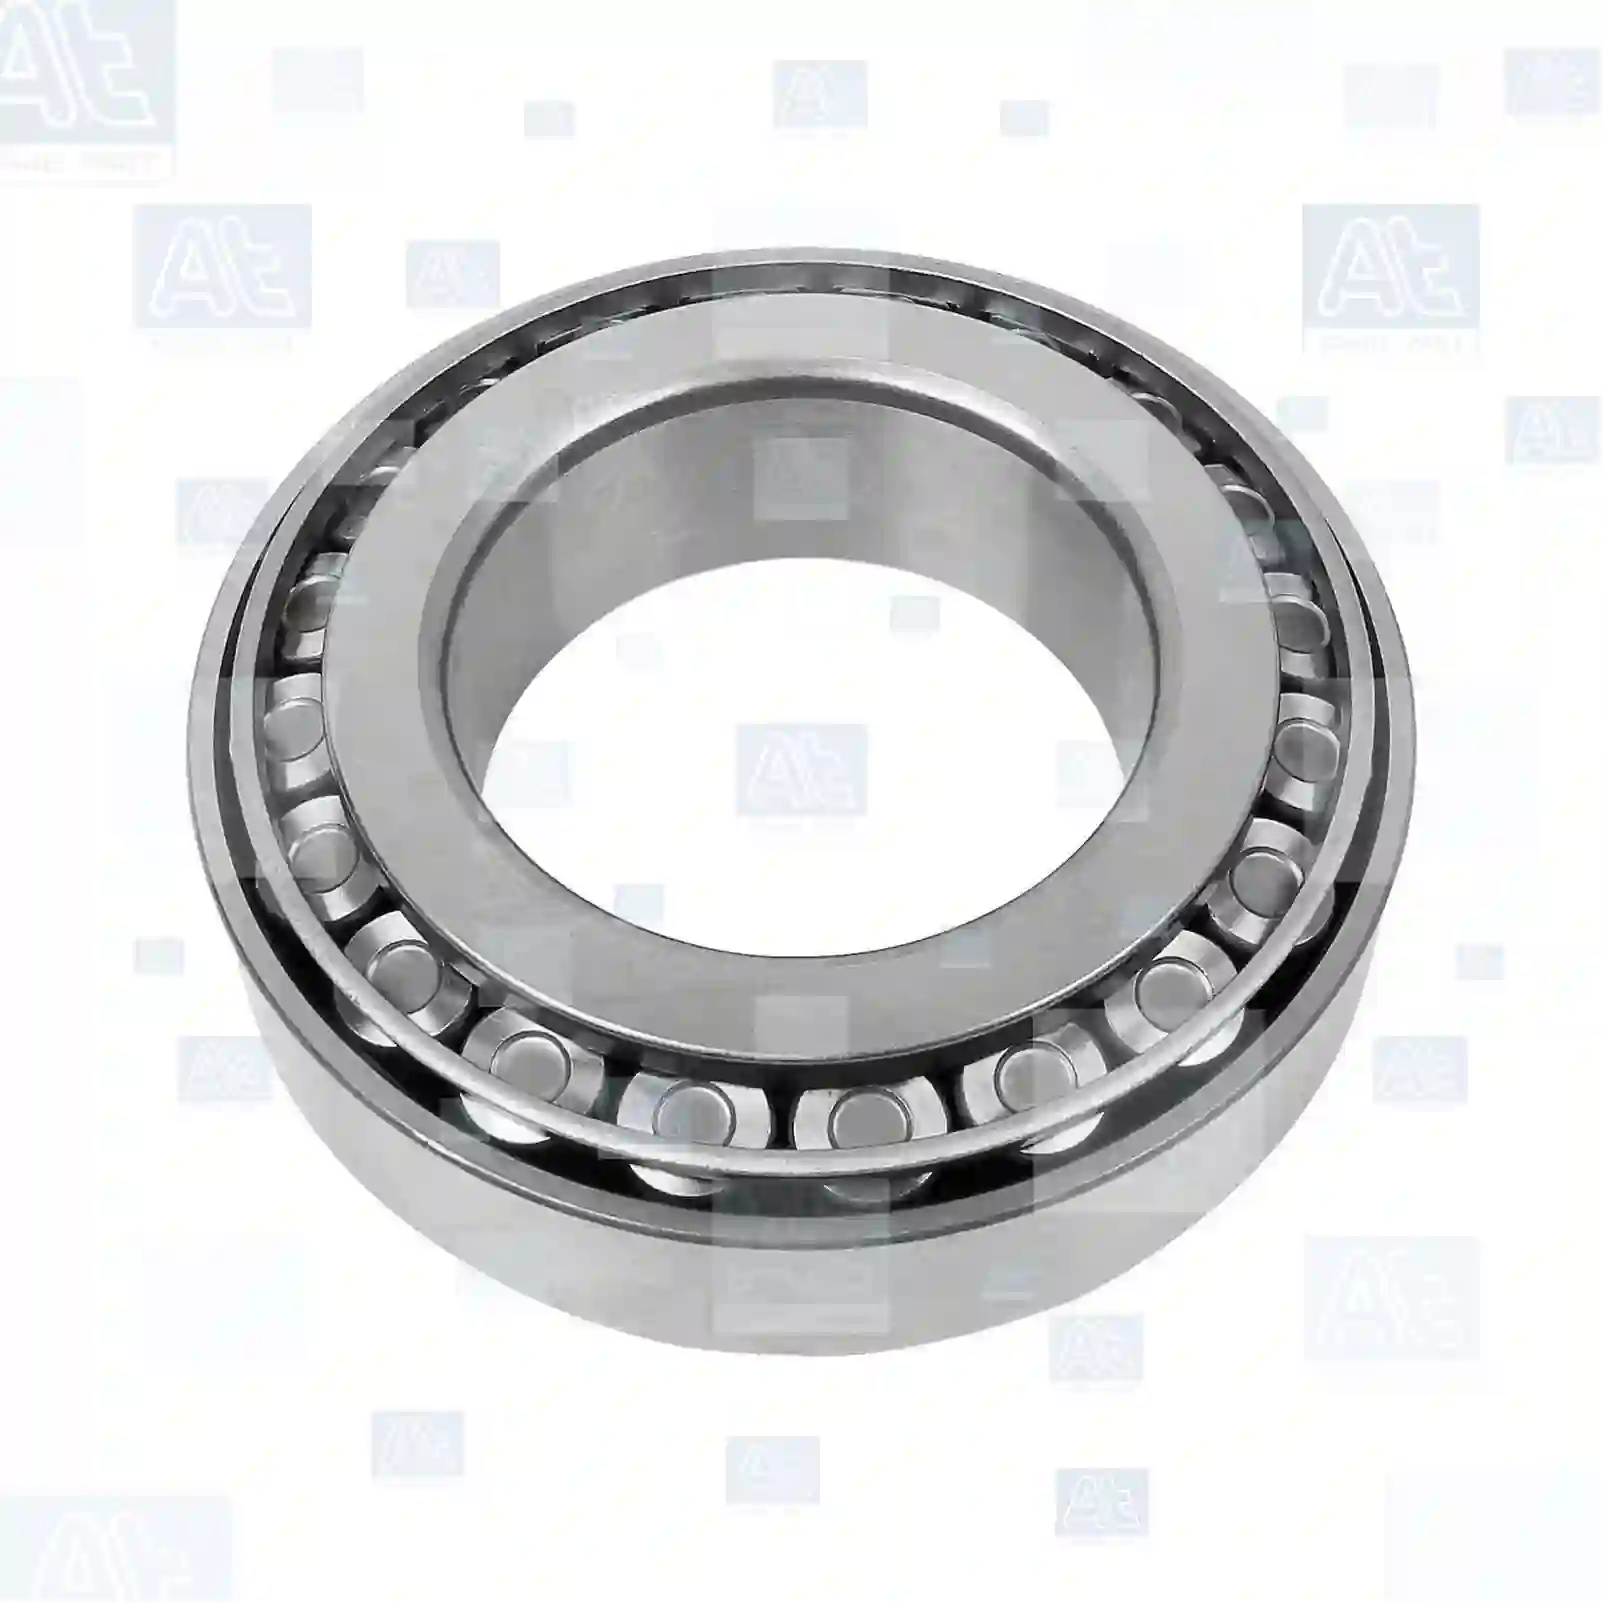 Tapered roller bearing, at no 77726557, oem no: 0264059500, 0264102800, 01905350, 07164543, 26800250, 10500859, 710500859, 94060943, 1-09812077-0, 1-09812195-0, 01905350, 07164543, 07178987, 1905350, 26800250, 3612949500, 7164543, 06324901800, 06324990009, 87523301400, A0023432219, 0009812105, 000720032219, 0023432219, 0959232219, 5000020632, 33725, 4200002600, 33948, 36129495, 1704000X, 181086, 181088 At Spare Part | Engine, Accelerator Pedal, Camshaft, Connecting Rod, Crankcase, Crankshaft, Cylinder Head, Engine Suspension Mountings, Exhaust Manifold, Exhaust Gas Recirculation, Filter Kits, Flywheel Housing, General Overhaul Kits, Engine, Intake Manifold, Oil Cleaner, Oil Cooler, Oil Filter, Oil Pump, Oil Sump, Piston & Liner, Sensor & Switch, Timing Case, Turbocharger, Cooling System, Belt Tensioner, Coolant Filter, Coolant Pipe, Corrosion Prevention Agent, Drive, Expansion Tank, Fan, Intercooler, Monitors & Gauges, Radiator, Thermostat, V-Belt / Timing belt, Water Pump, Fuel System, Electronical Injector Unit, Feed Pump, Fuel Filter, cpl., Fuel Gauge Sender,  Fuel Line, Fuel Pump, Fuel Tank, Injection Line Kit, Injection Pump, Exhaust System, Clutch & Pedal, Gearbox, Propeller Shaft, Axles, Brake System, Hubs & Wheels, Suspension, Leaf Spring, Universal Parts / Accessories, Steering, Electrical System, Cabin Tapered roller bearing, at no 77726557, oem no: 0264059500, 0264102800, 01905350, 07164543, 26800250, 10500859, 710500859, 94060943, 1-09812077-0, 1-09812195-0, 01905350, 07164543, 07178987, 1905350, 26800250, 3612949500, 7164543, 06324901800, 06324990009, 87523301400, A0023432219, 0009812105, 000720032219, 0023432219, 0959232219, 5000020632, 33725, 4200002600, 33948, 36129495, 1704000X, 181086, 181088 At Spare Part | Engine, Accelerator Pedal, Camshaft, Connecting Rod, Crankcase, Crankshaft, Cylinder Head, Engine Suspension Mountings, Exhaust Manifold, Exhaust Gas Recirculation, Filter Kits, Flywheel Housing, General Overhaul Kits, Engine, Intake Manifold, Oil Cleaner, Oil Cooler, Oil Filter, Oil Pump, Oil Sump, Piston & Liner, Sensor & Switch, Timing Case, Turbocharger, Cooling System, Belt Tensioner, Coolant Filter, Coolant Pipe, Corrosion Prevention Agent, Drive, Expansion Tank, Fan, Intercooler, Monitors & Gauges, Radiator, Thermostat, V-Belt / Timing belt, Water Pump, Fuel System, Electronical Injector Unit, Feed Pump, Fuel Filter, cpl., Fuel Gauge Sender,  Fuel Line, Fuel Pump, Fuel Tank, Injection Line Kit, Injection Pump, Exhaust System, Clutch & Pedal, Gearbox, Propeller Shaft, Axles, Brake System, Hubs & Wheels, Suspension, Leaf Spring, Universal Parts / Accessories, Steering, Electrical System, Cabin